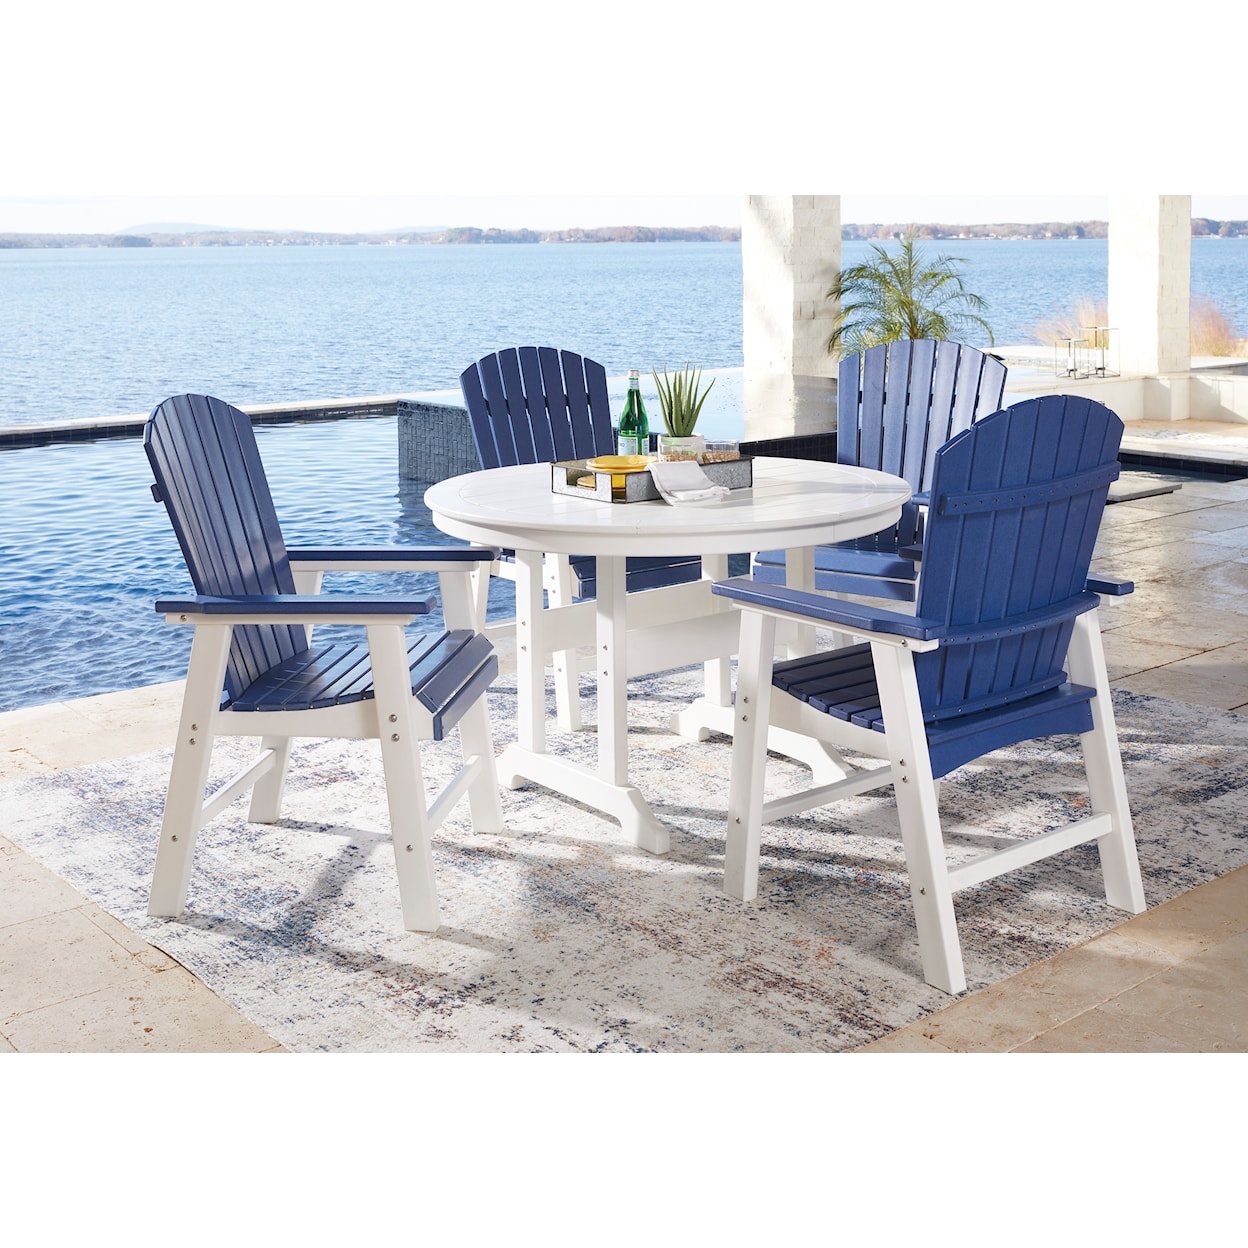 Signature Design by Ashley Crescent Luxe 5-Piece Dining Set